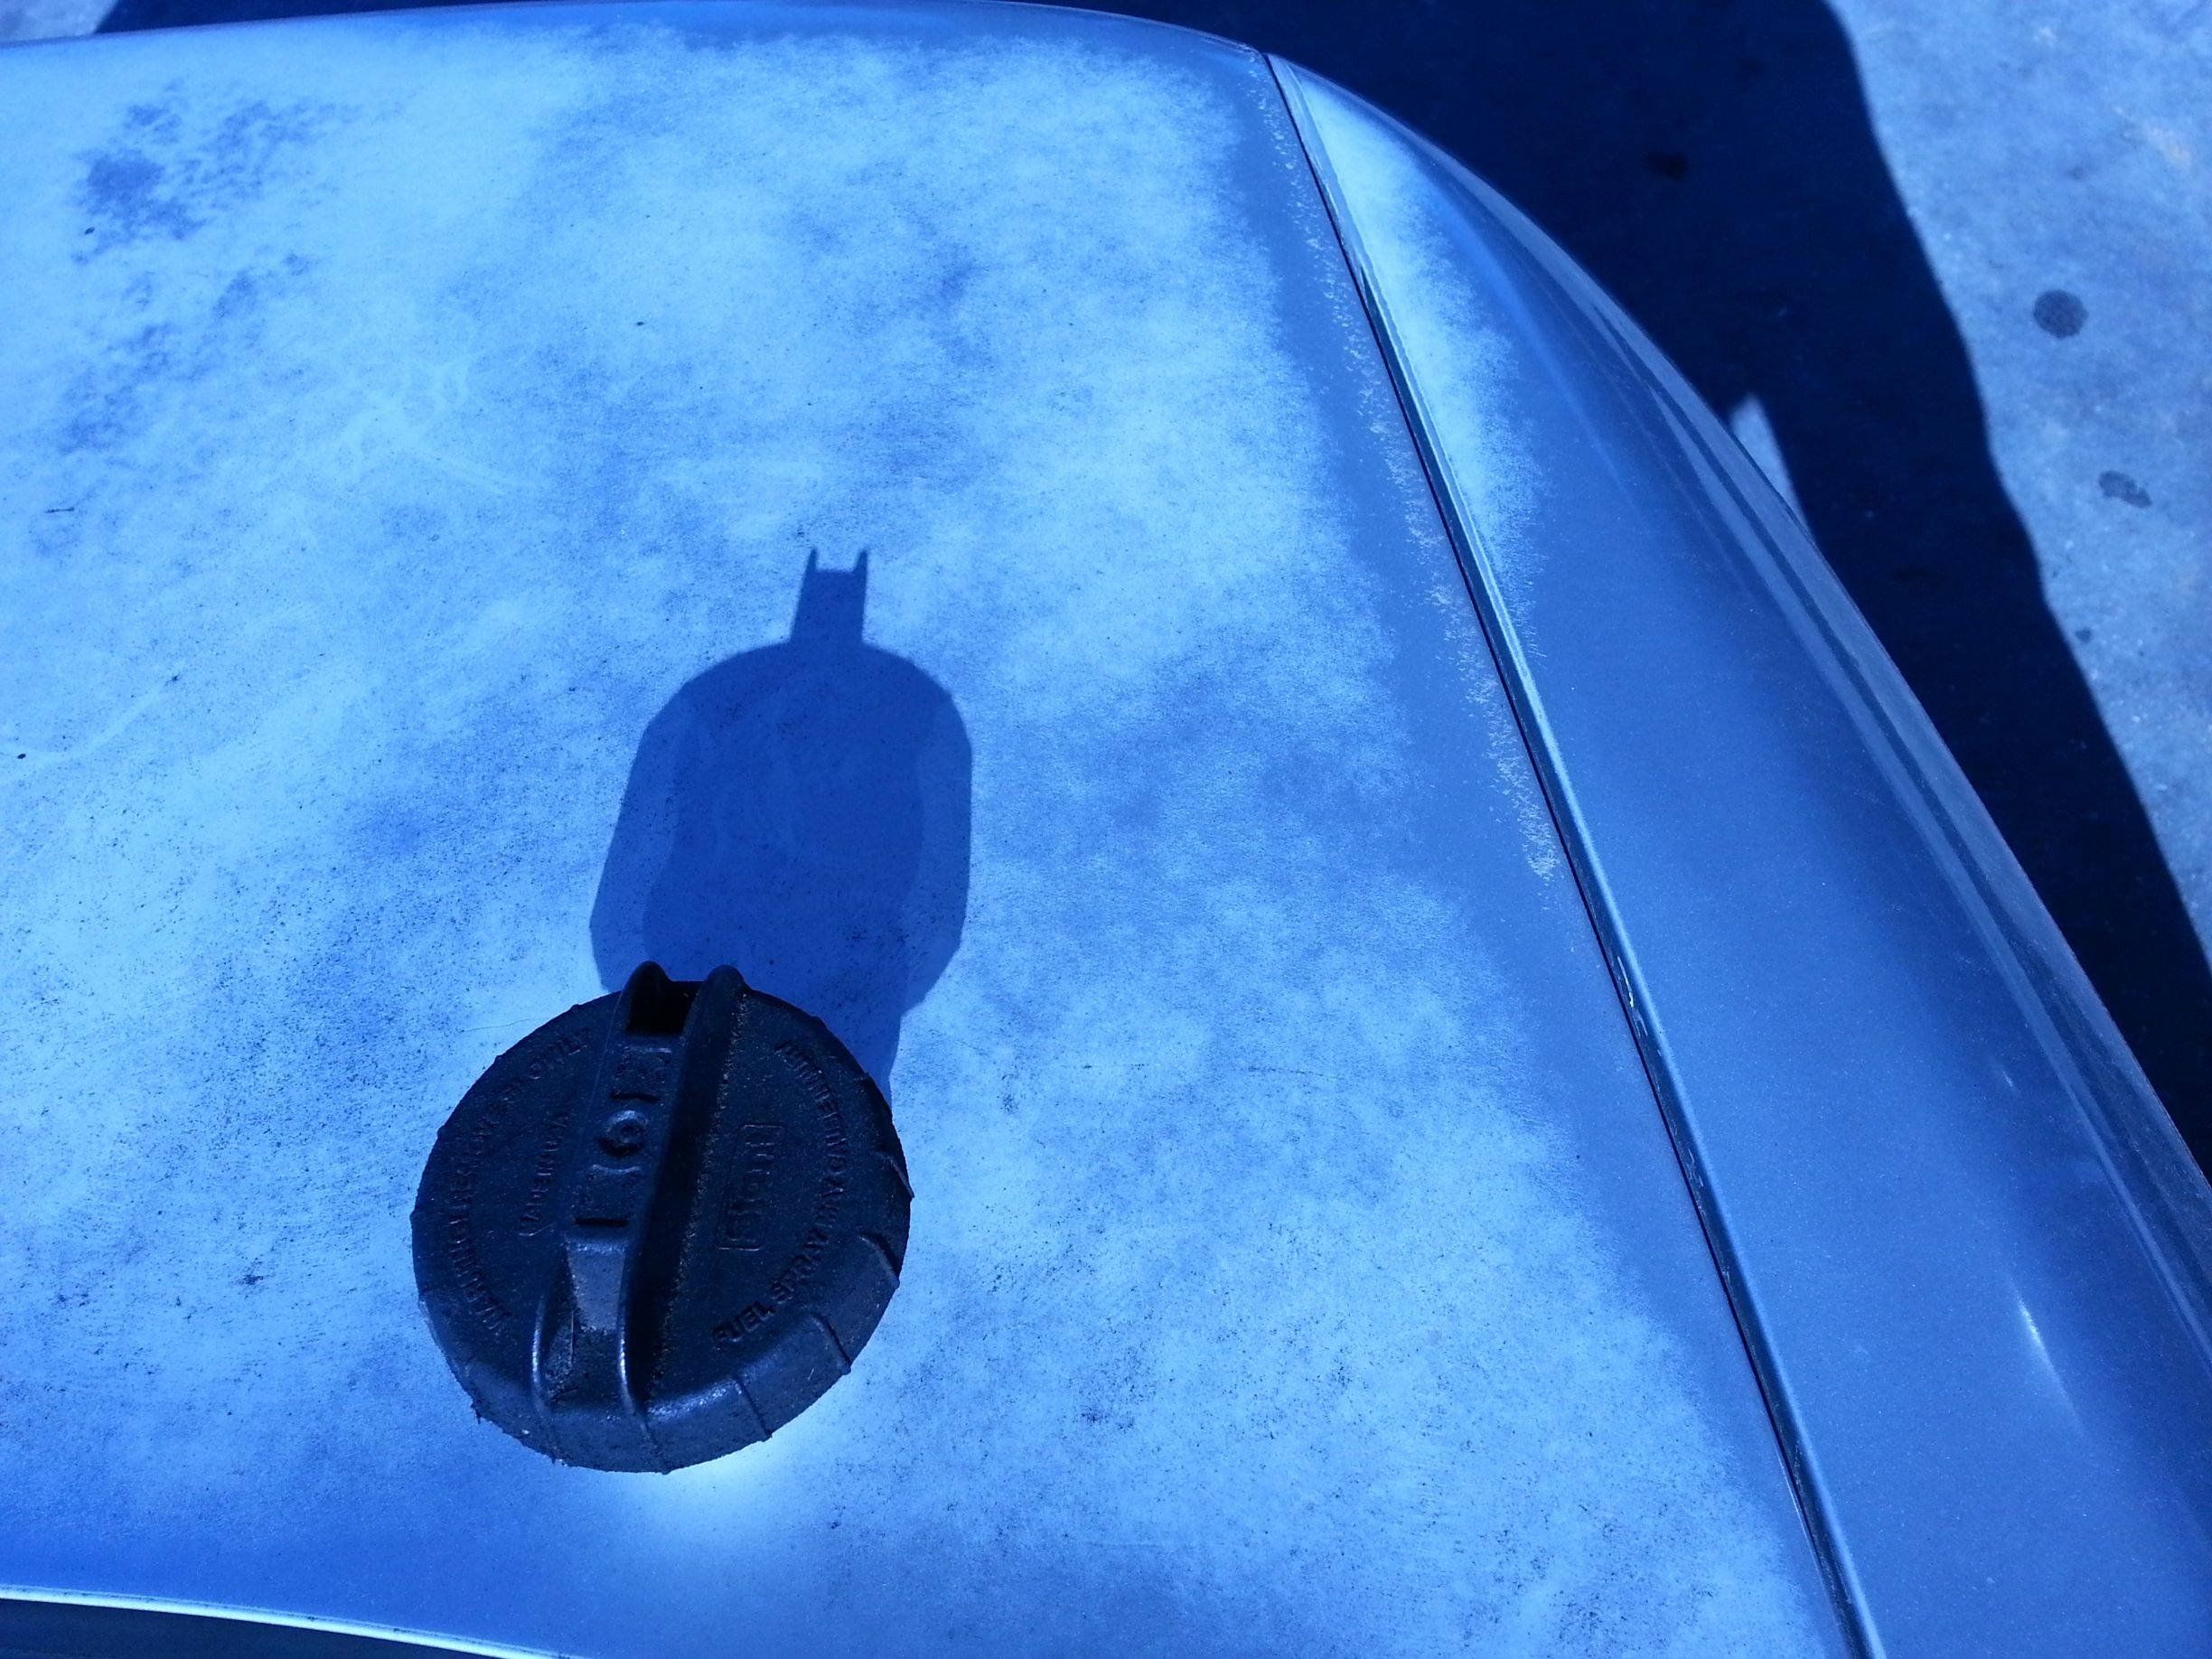 The shadow of this guy's gas cap looks like Batman.